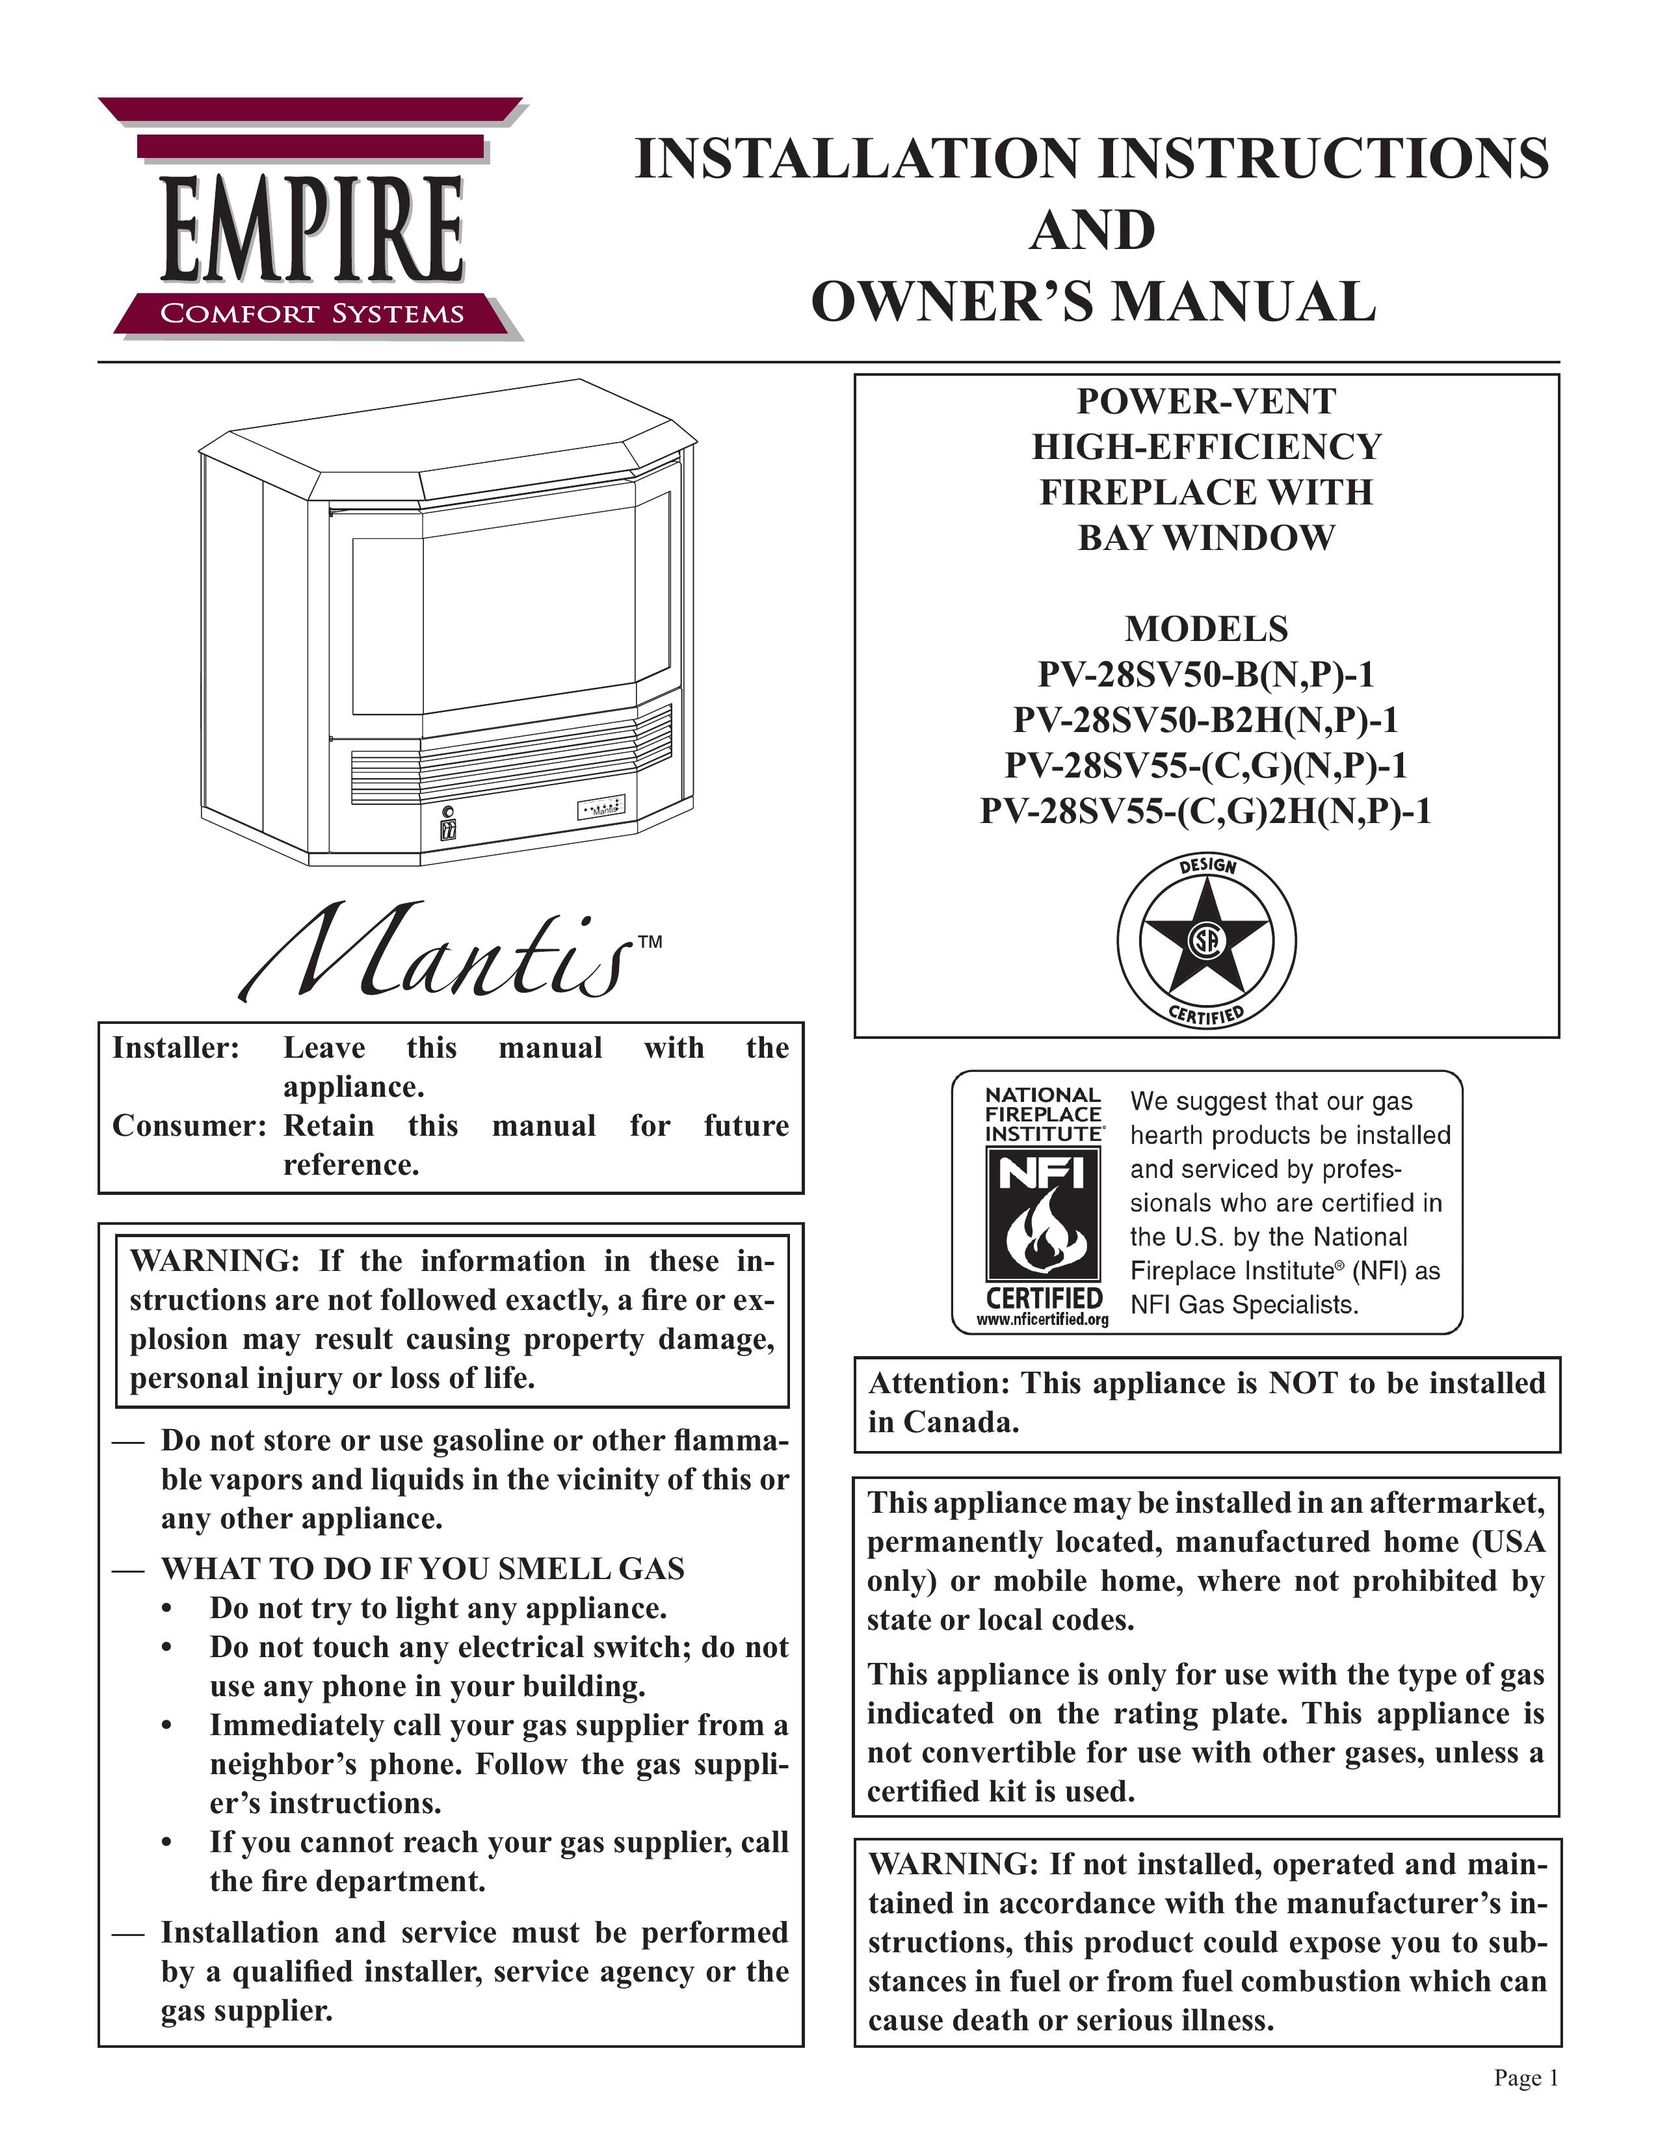 Empire Comfort Systems PV-28SV50-B2H(N,P)-1 Indoor Fireplace User Manual